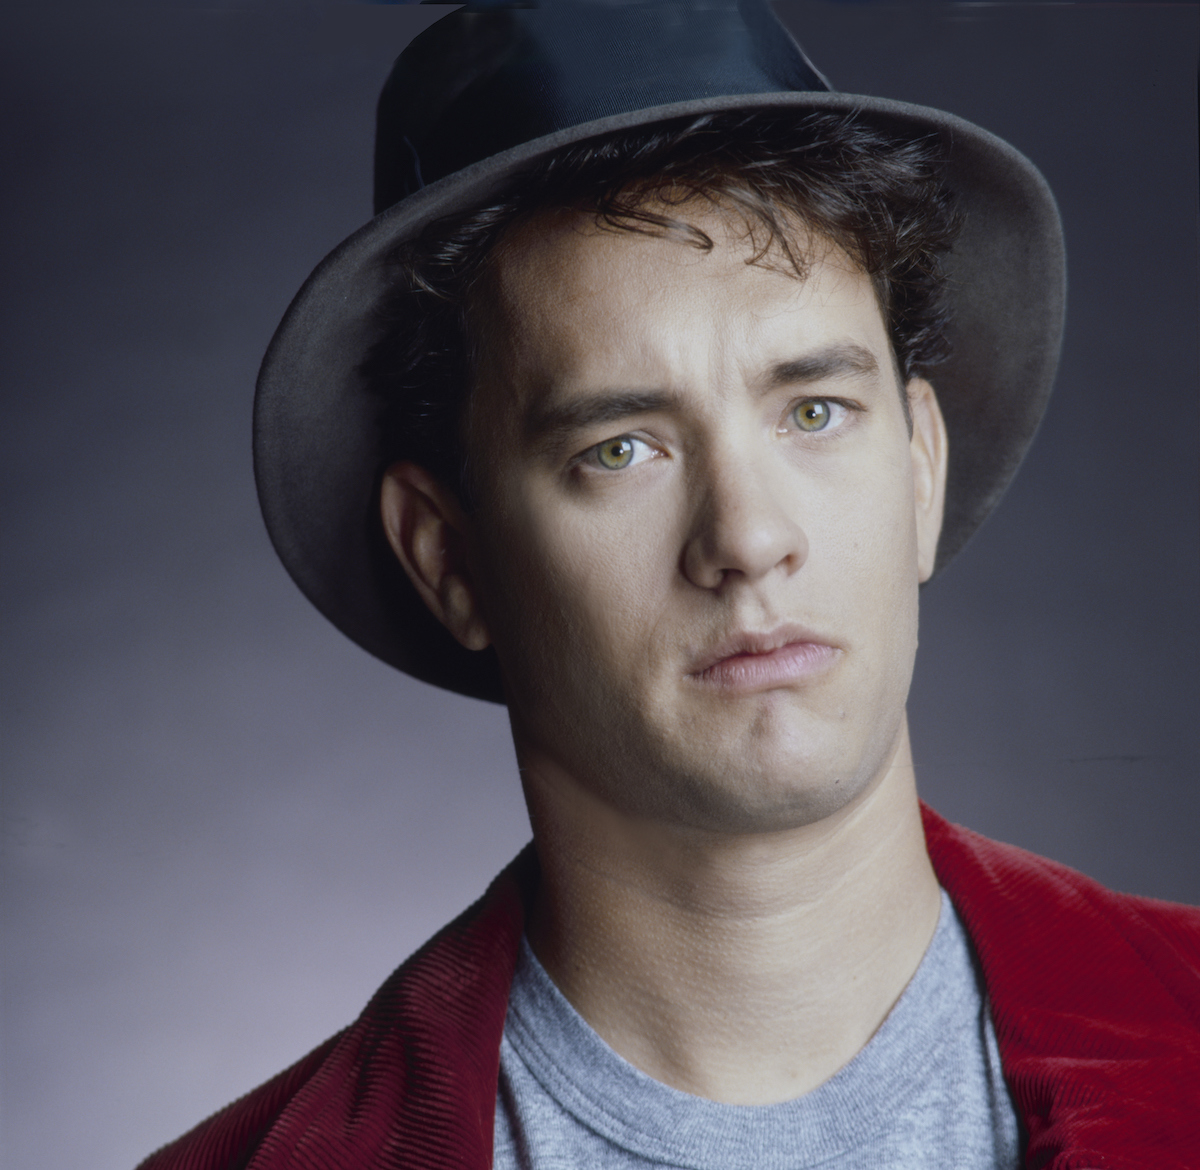 Tom Hanks wears a hot and poses in 1988